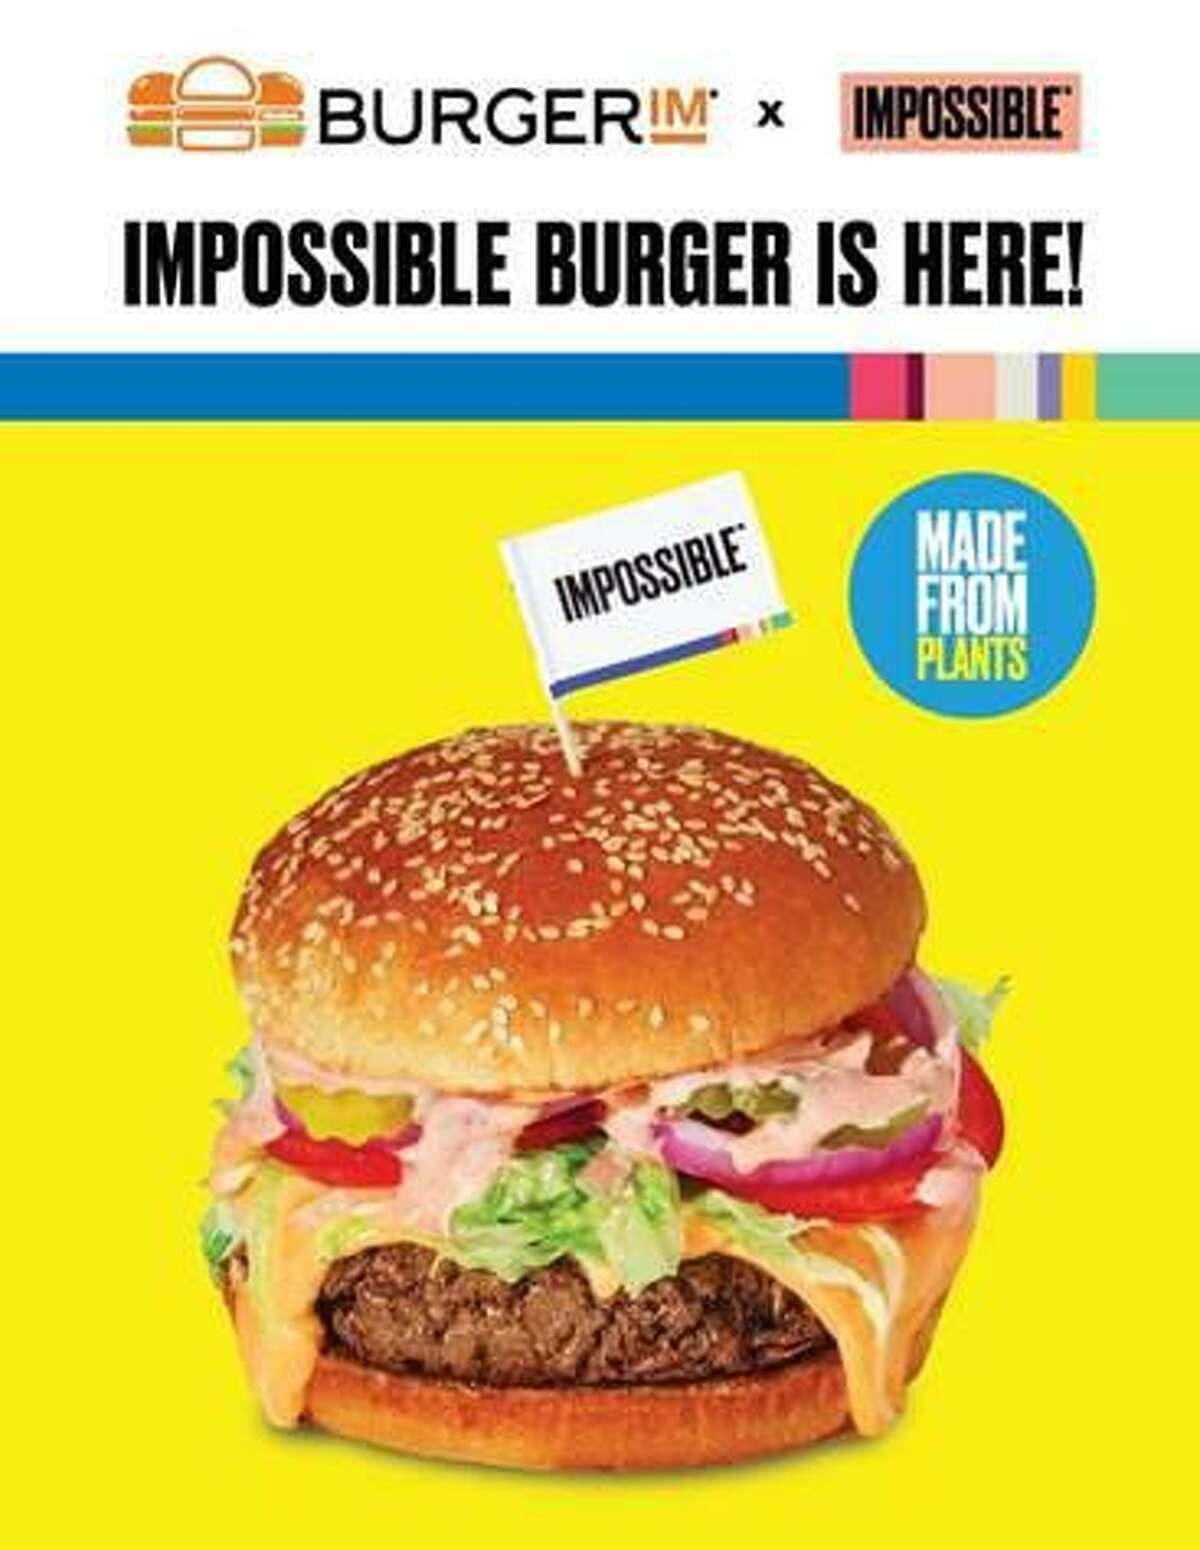 BurgerIM, an Israeli fast-food chain with a location in Parkdale Mall, is celebrating the launch of its partnership with Impossible Foods with free Impossible Burgers on Black Friday.